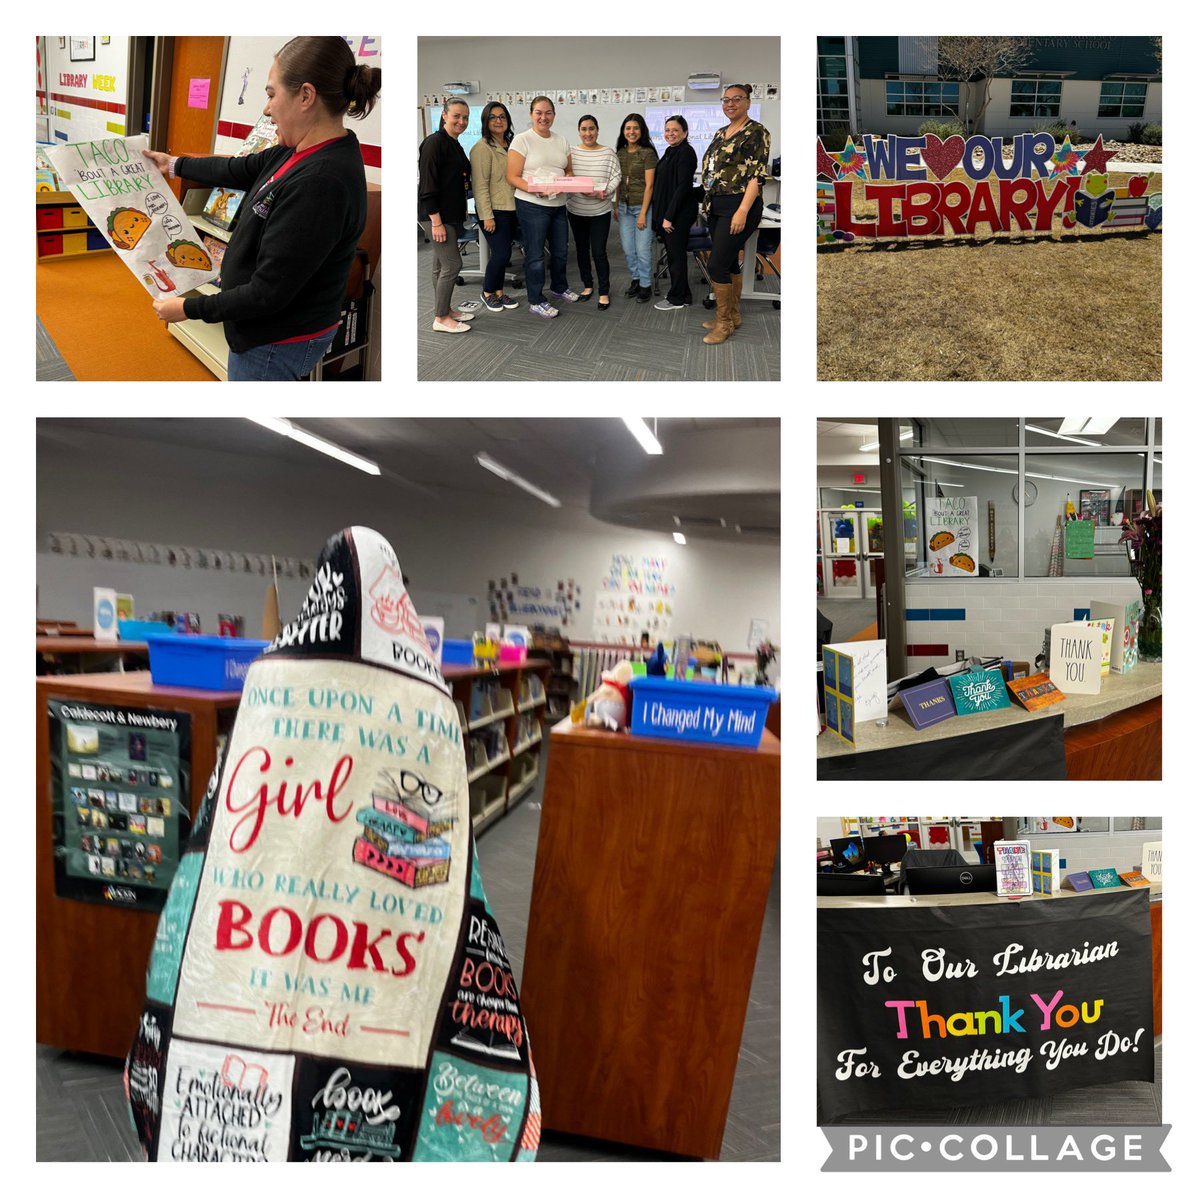 Feeling incredibly grateful for all the love and support shown during Library Week! 📚💕 Thank you to everyone who celebrated with us and recognized the importance of libraries in our schools. You make being a librarian even more rewarding! #NationalLibraryWeek #SISD_Libraries